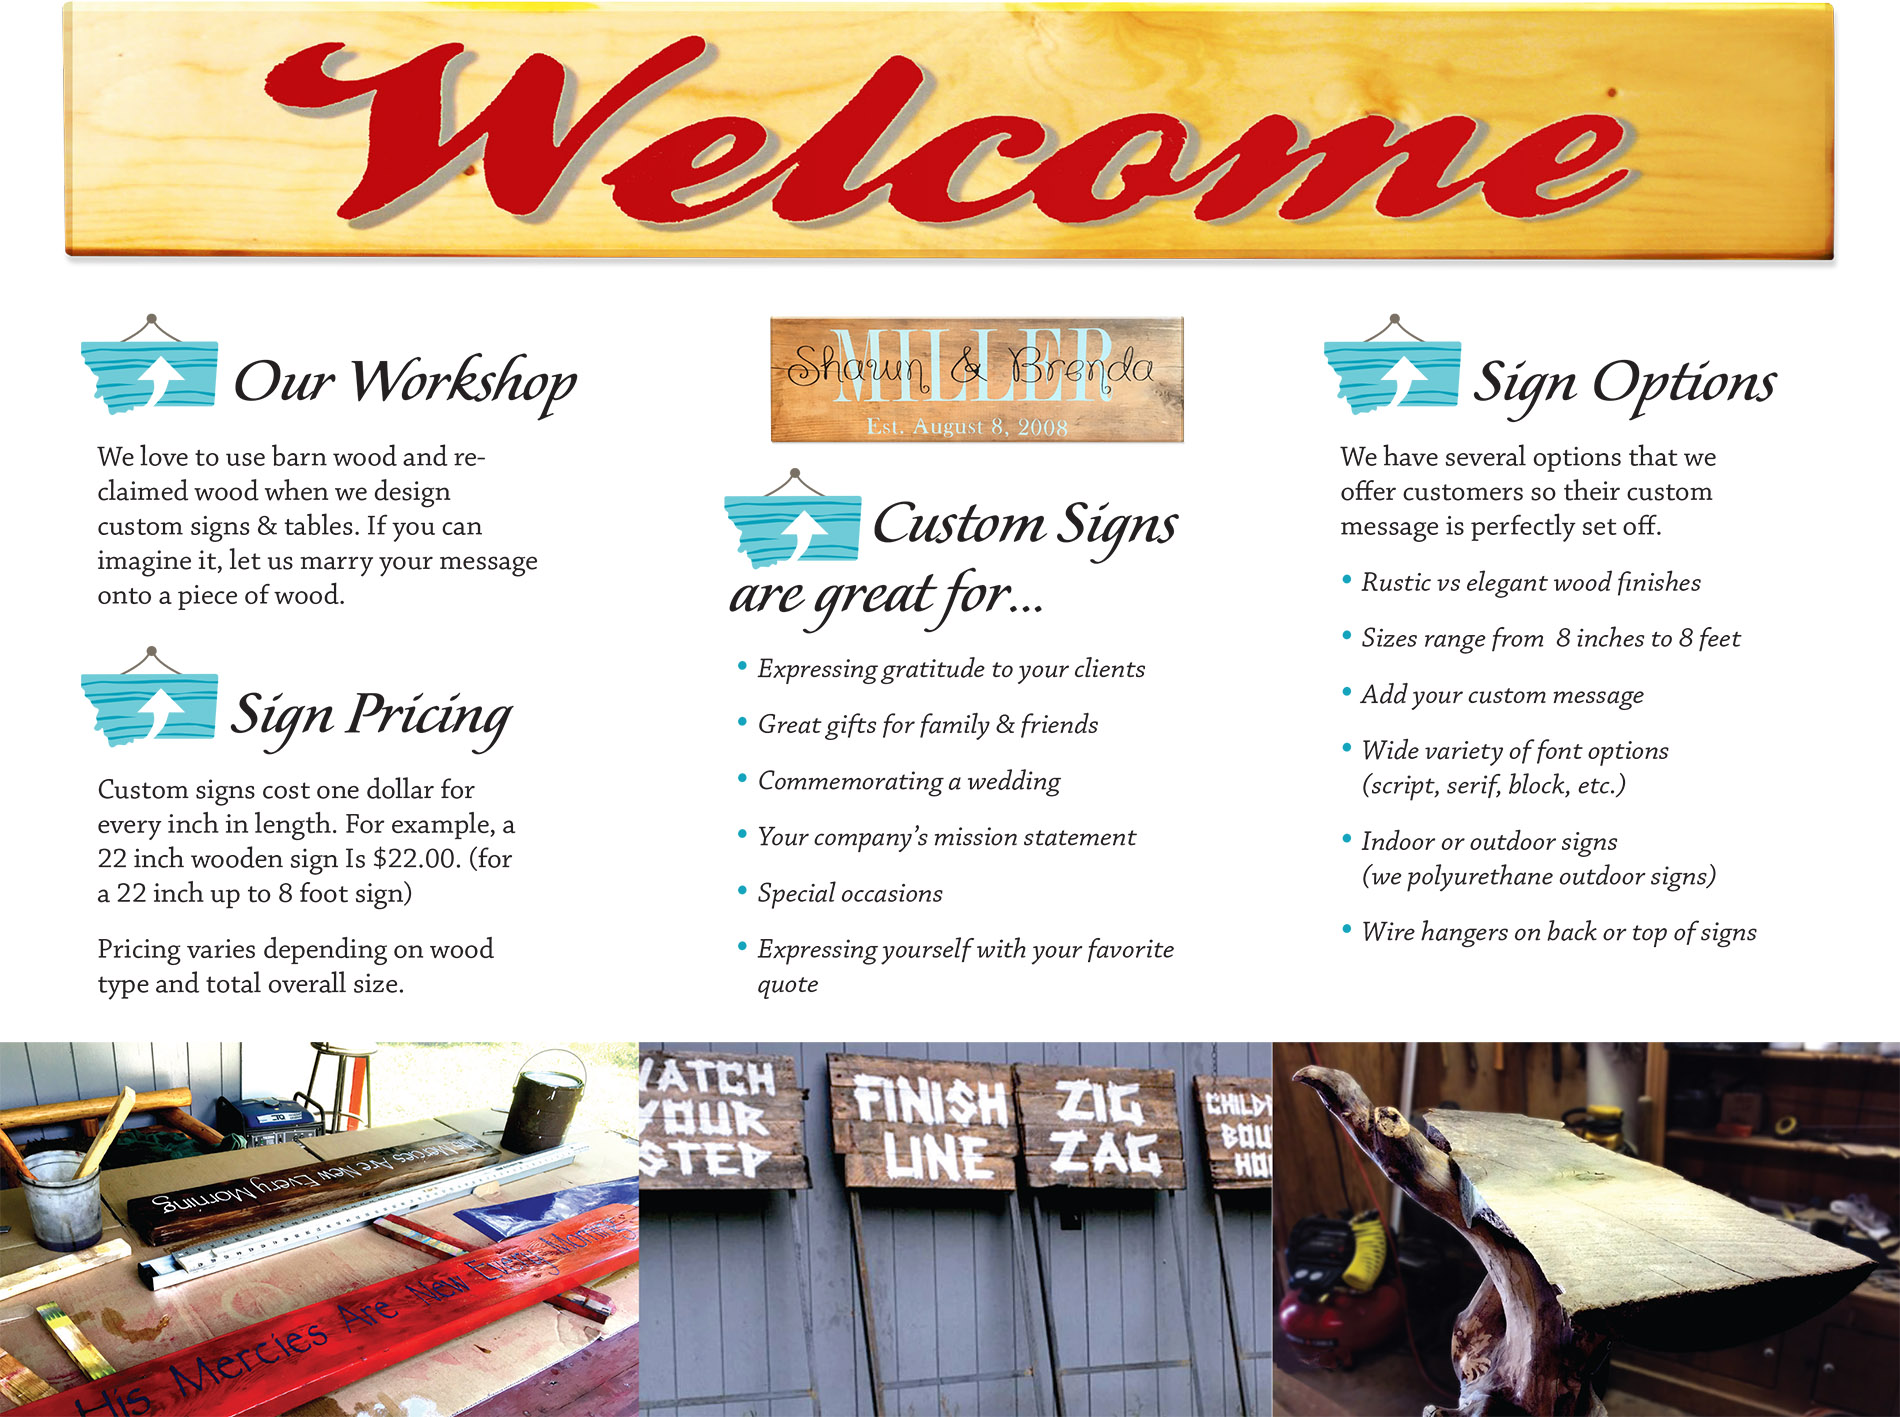 logo and branding image with wooden sign and color swatches